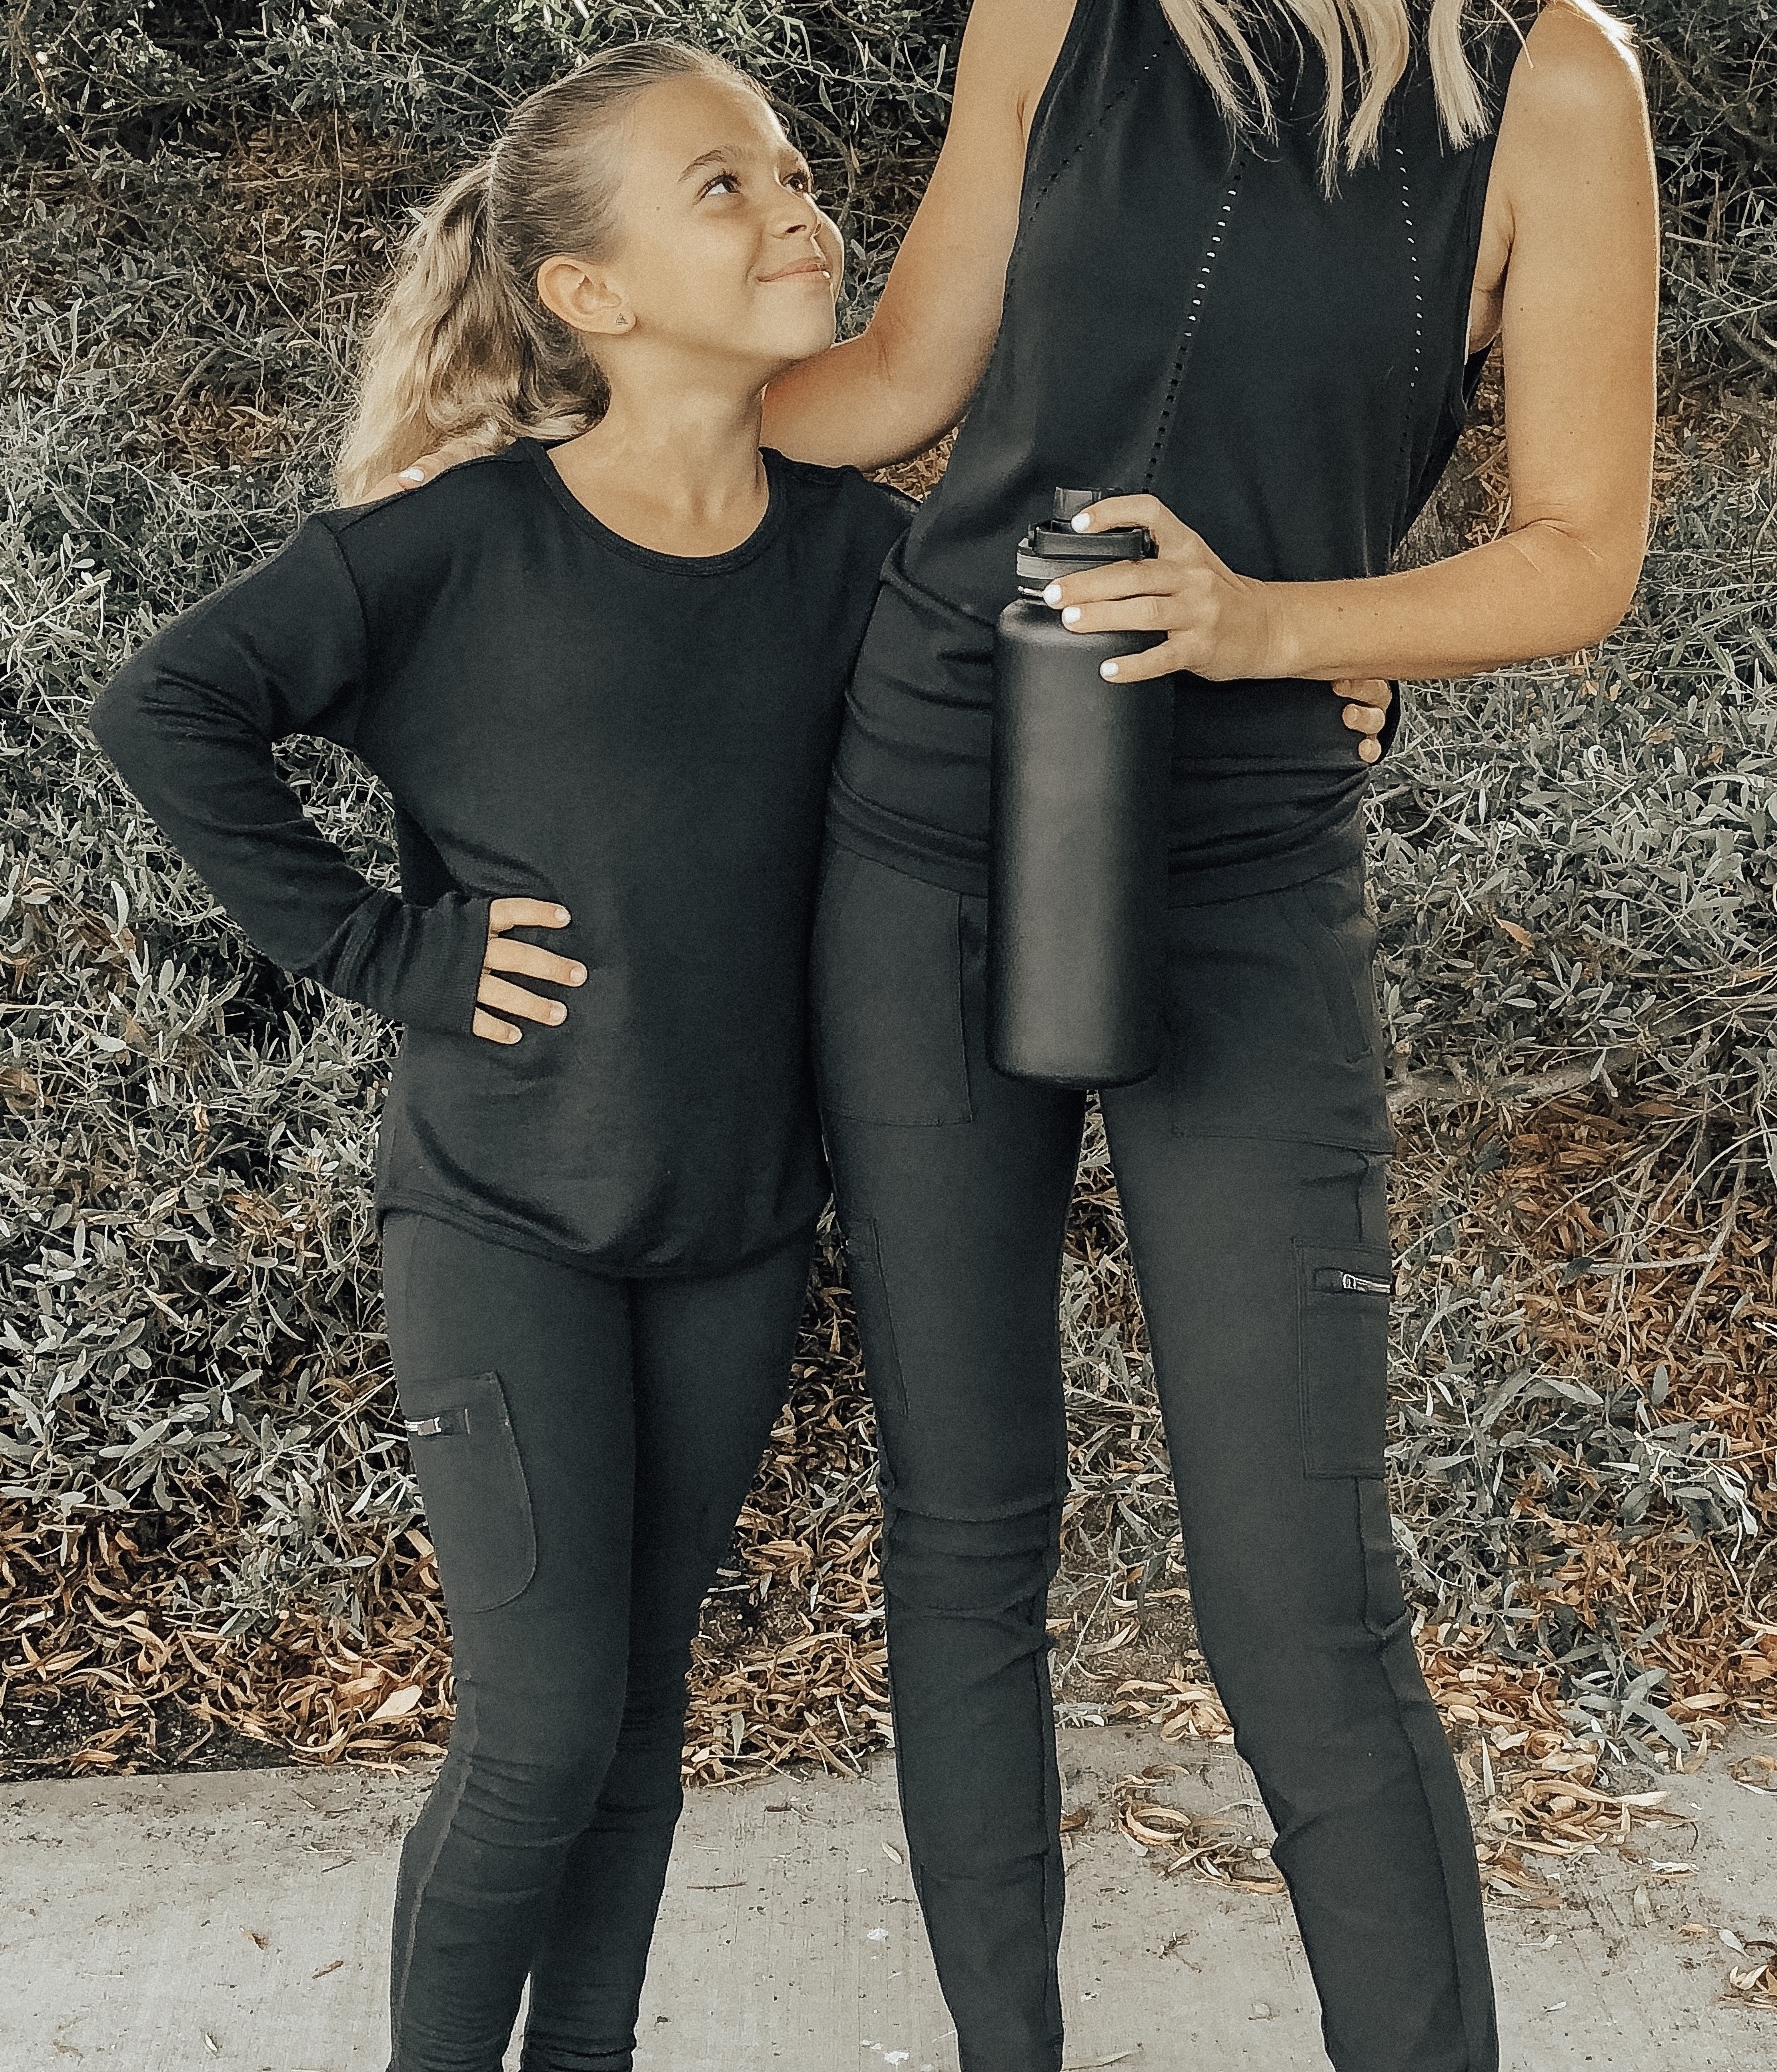 STAYING ACTIVE WITH ATHLETA- Jaclyn De Leon Style + Mommy and me matching looks + active wear + soccer + sports + momlife + stretching + black chic athletic wear